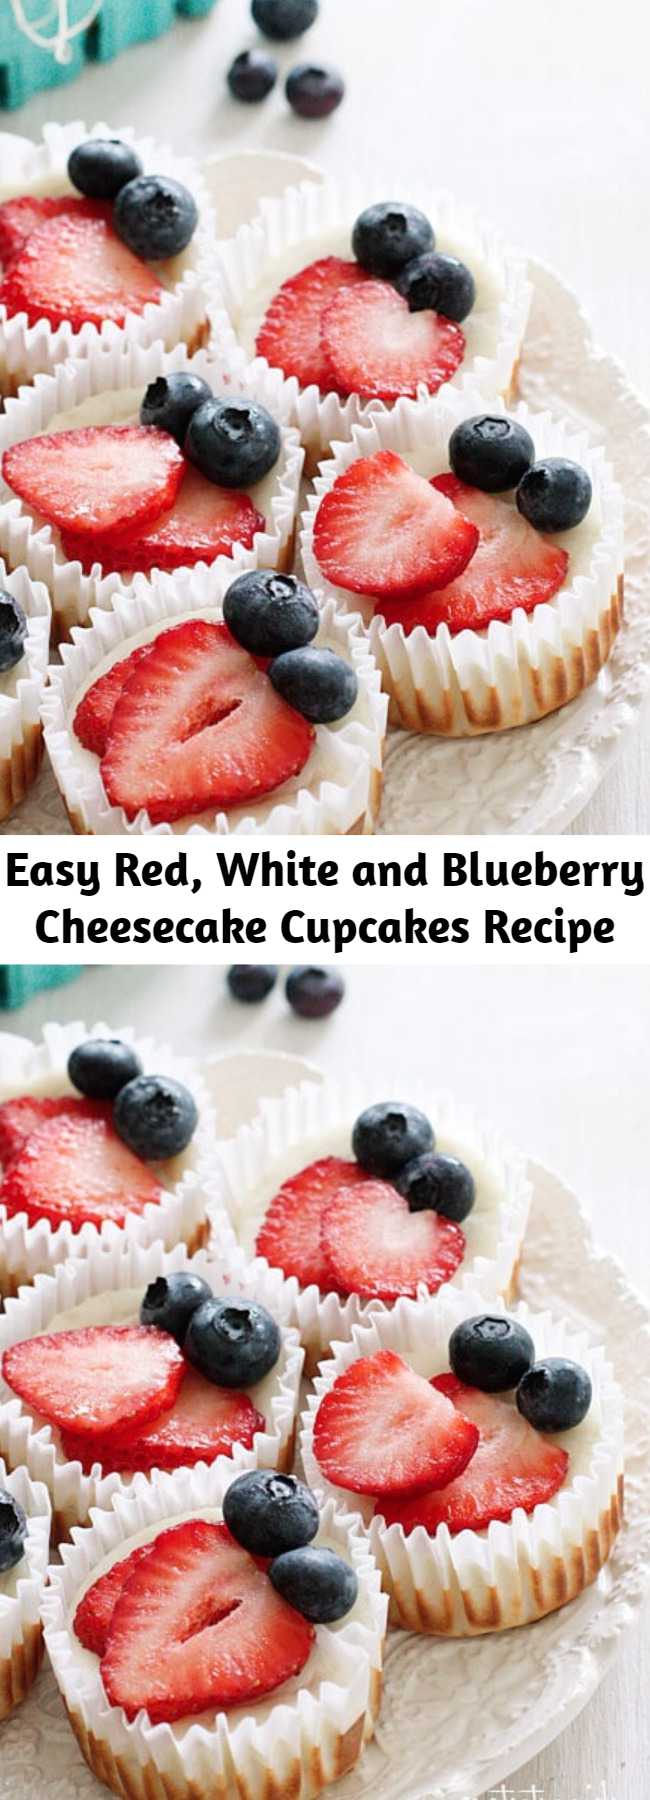 Easy Red, White and Blueberry Cheesecake Cupcakes Recipe - Mini cheesecake cupcakes made with Greek yogurt and cream cheese with a vanilla wafer crust topped with strawberries and blueberries to create a red, white and blue dessert using Mother Nature as my source for food coloring.